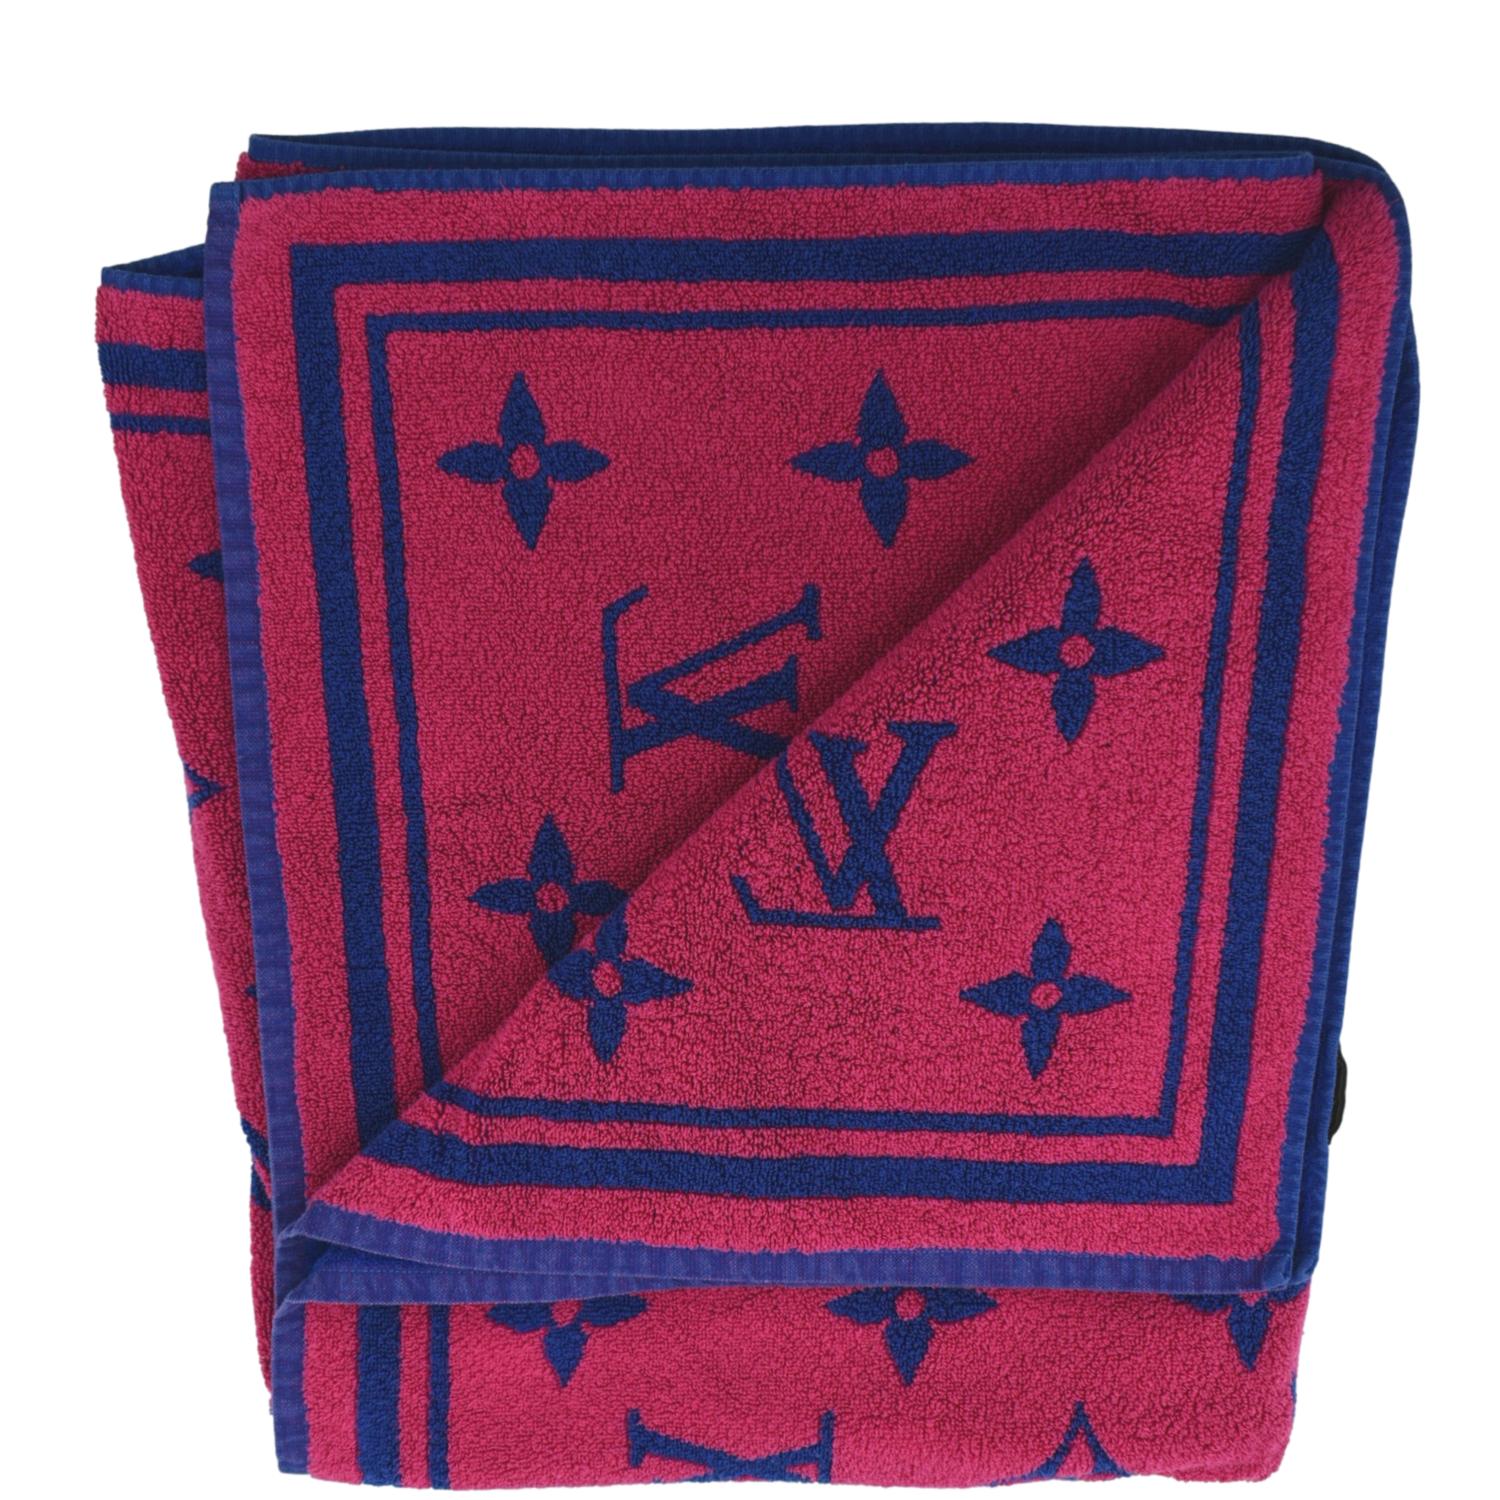 Products By Louis Vuitton: Monogram Classic Beach Towel